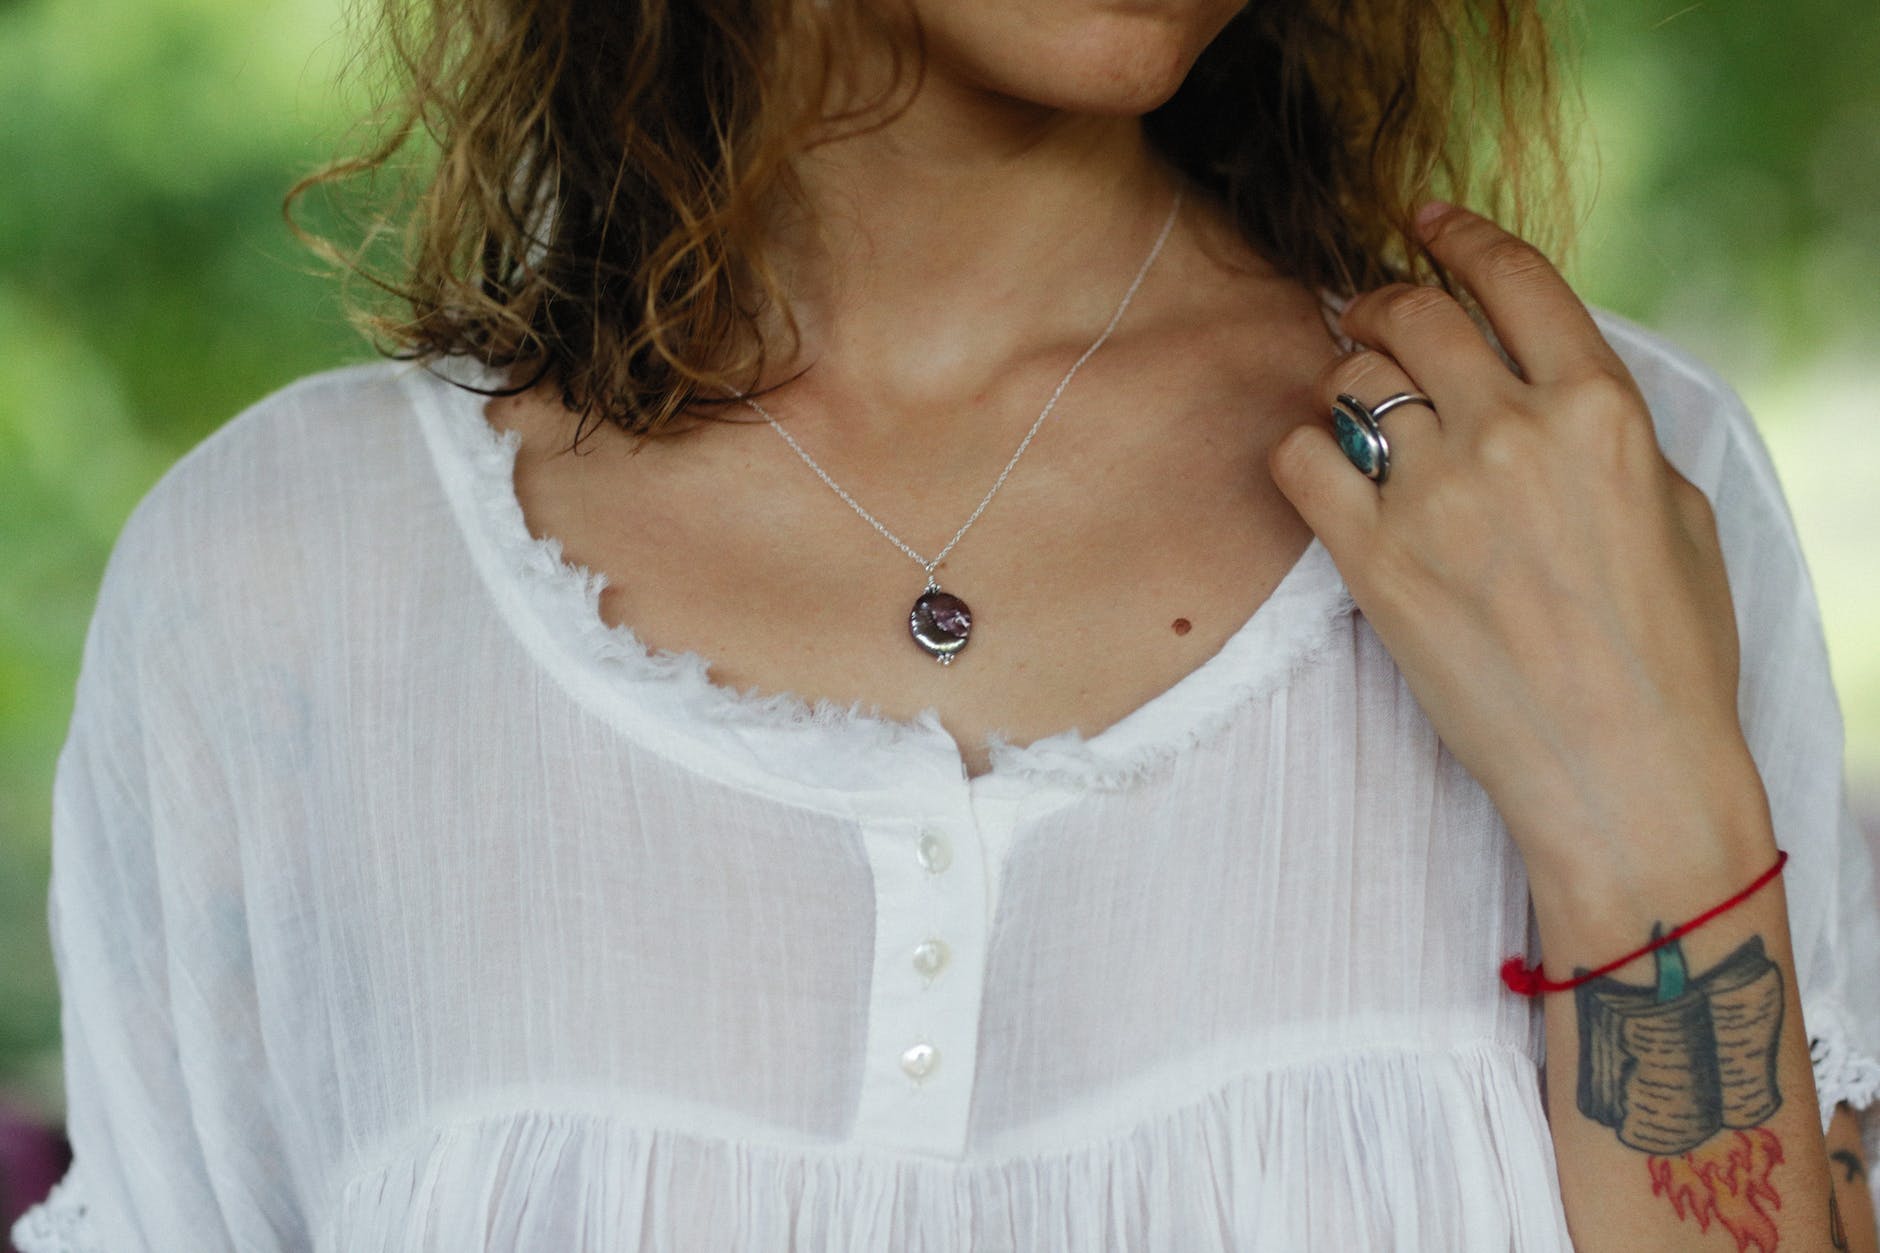 necklace on a woman in a white blouse